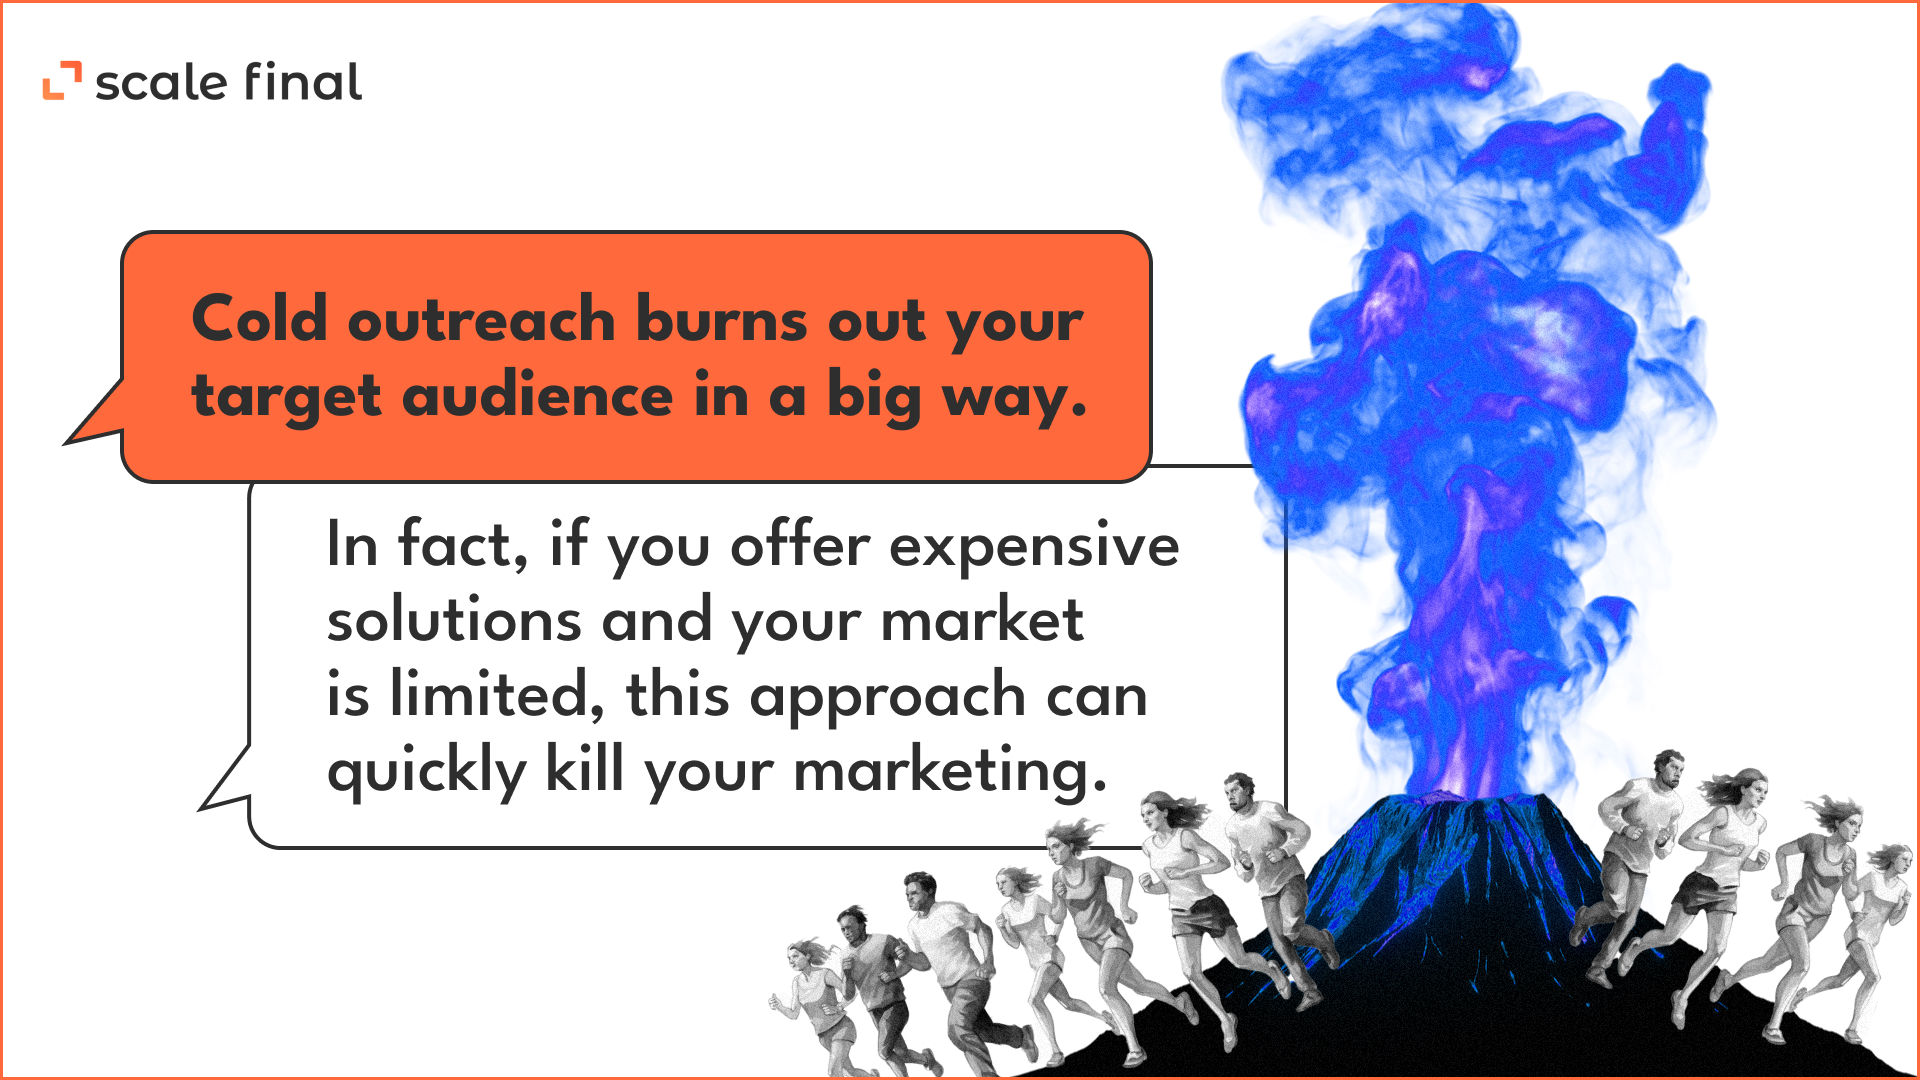 Cold outreach burns out your target audience in a big way.In fact, if you offer expensive solutions and your market is limited, this approach can quickly kill your marketing.